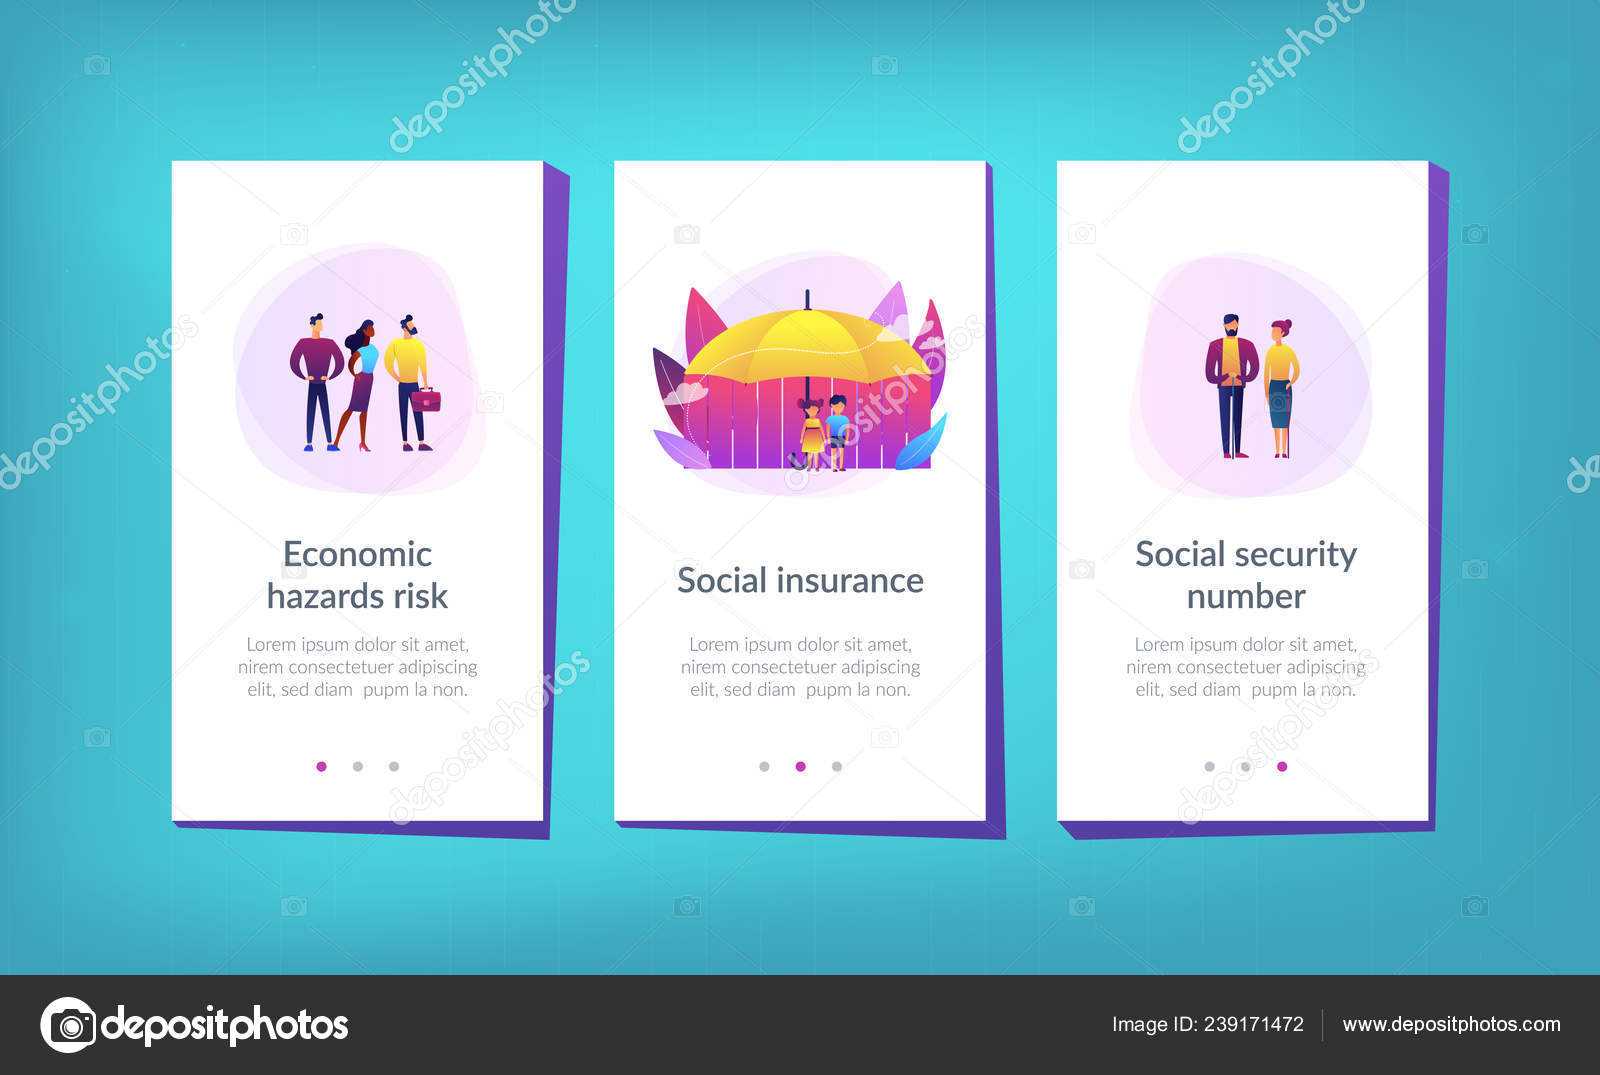 Blank Social Security Card Template | Social Insurance App Within Blank Social Security Card Template Download